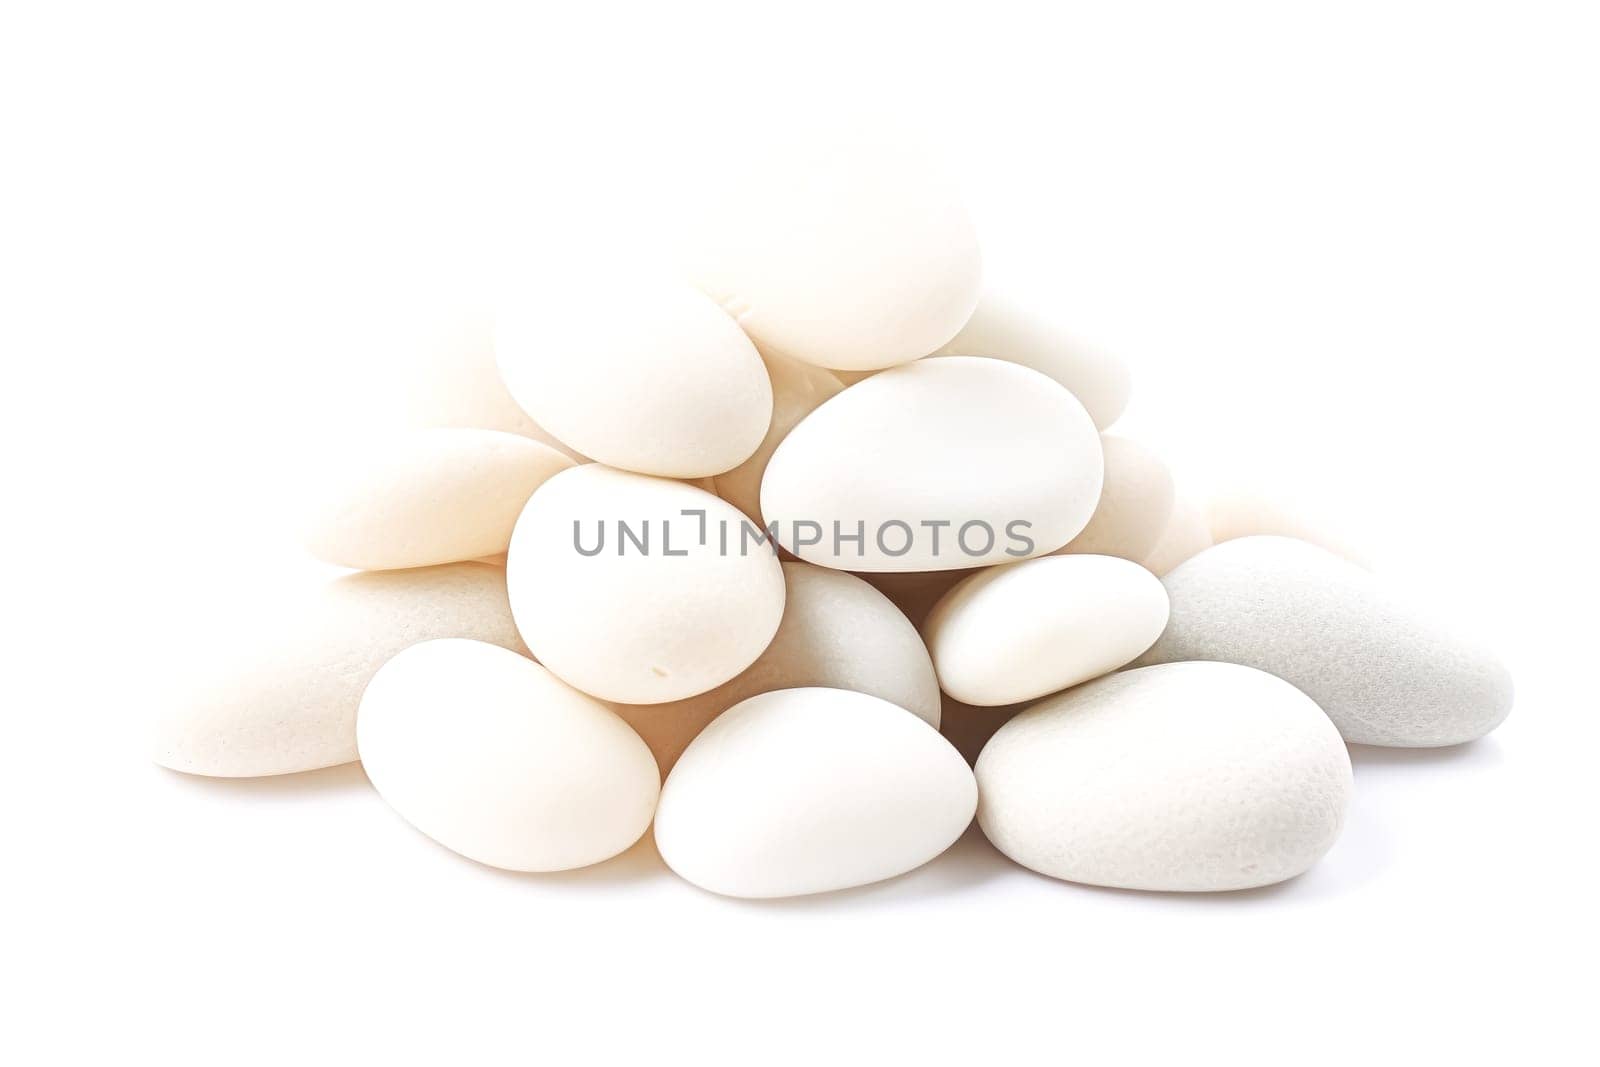 A pile of white rocks stacked on top of each other. Concept of stability and strength, as the rocks are stacked in a way that creates a solid foundation